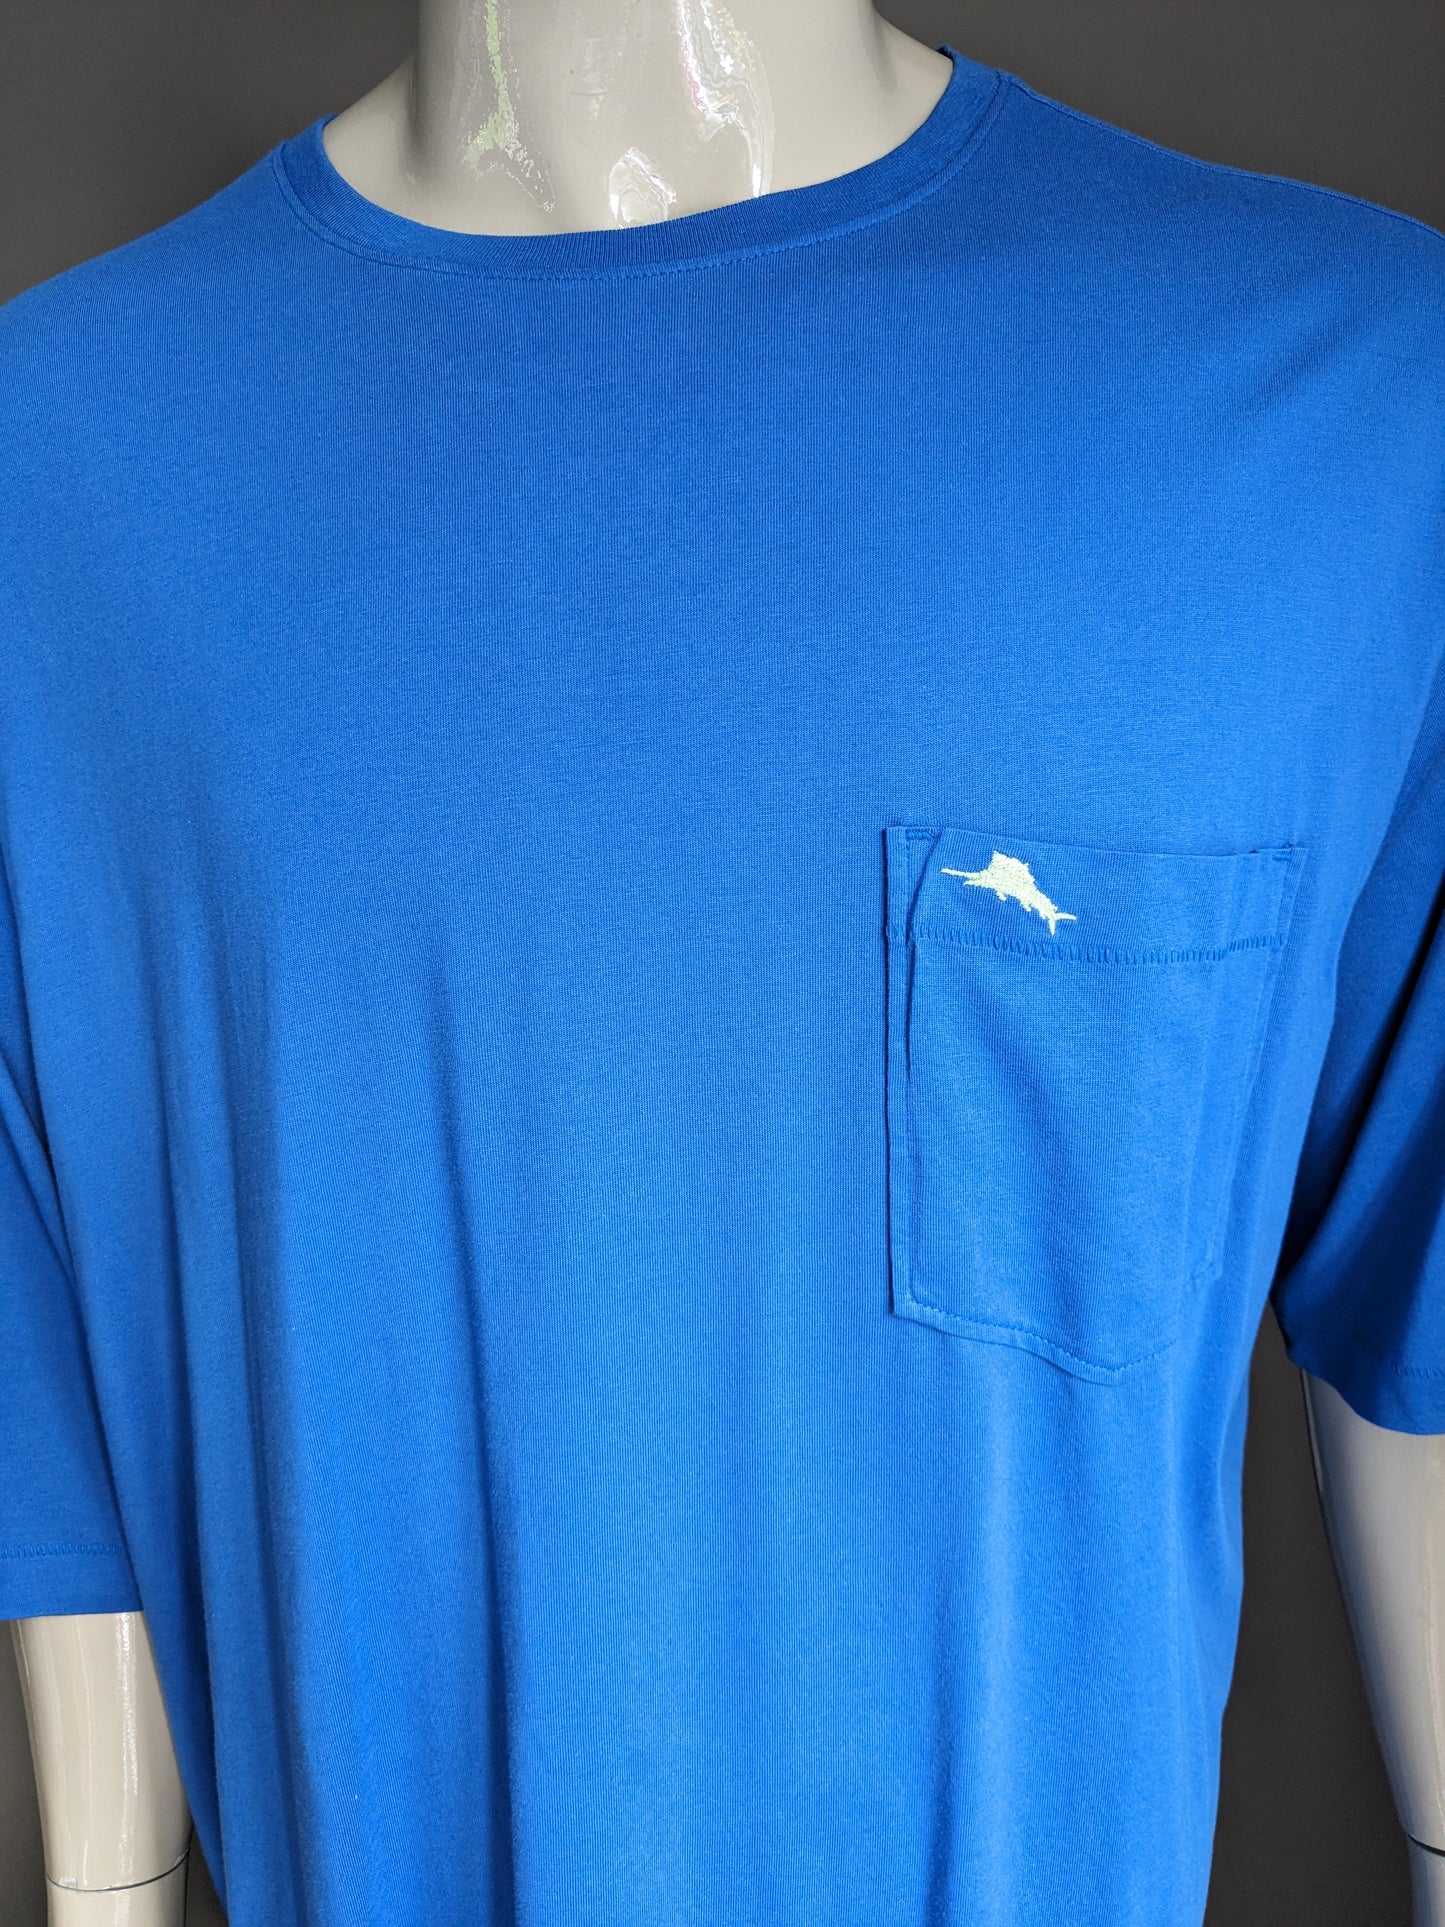 Tommy Bahama Relax Shirt. Couleur bleue. Taille 2xl / 3xl.